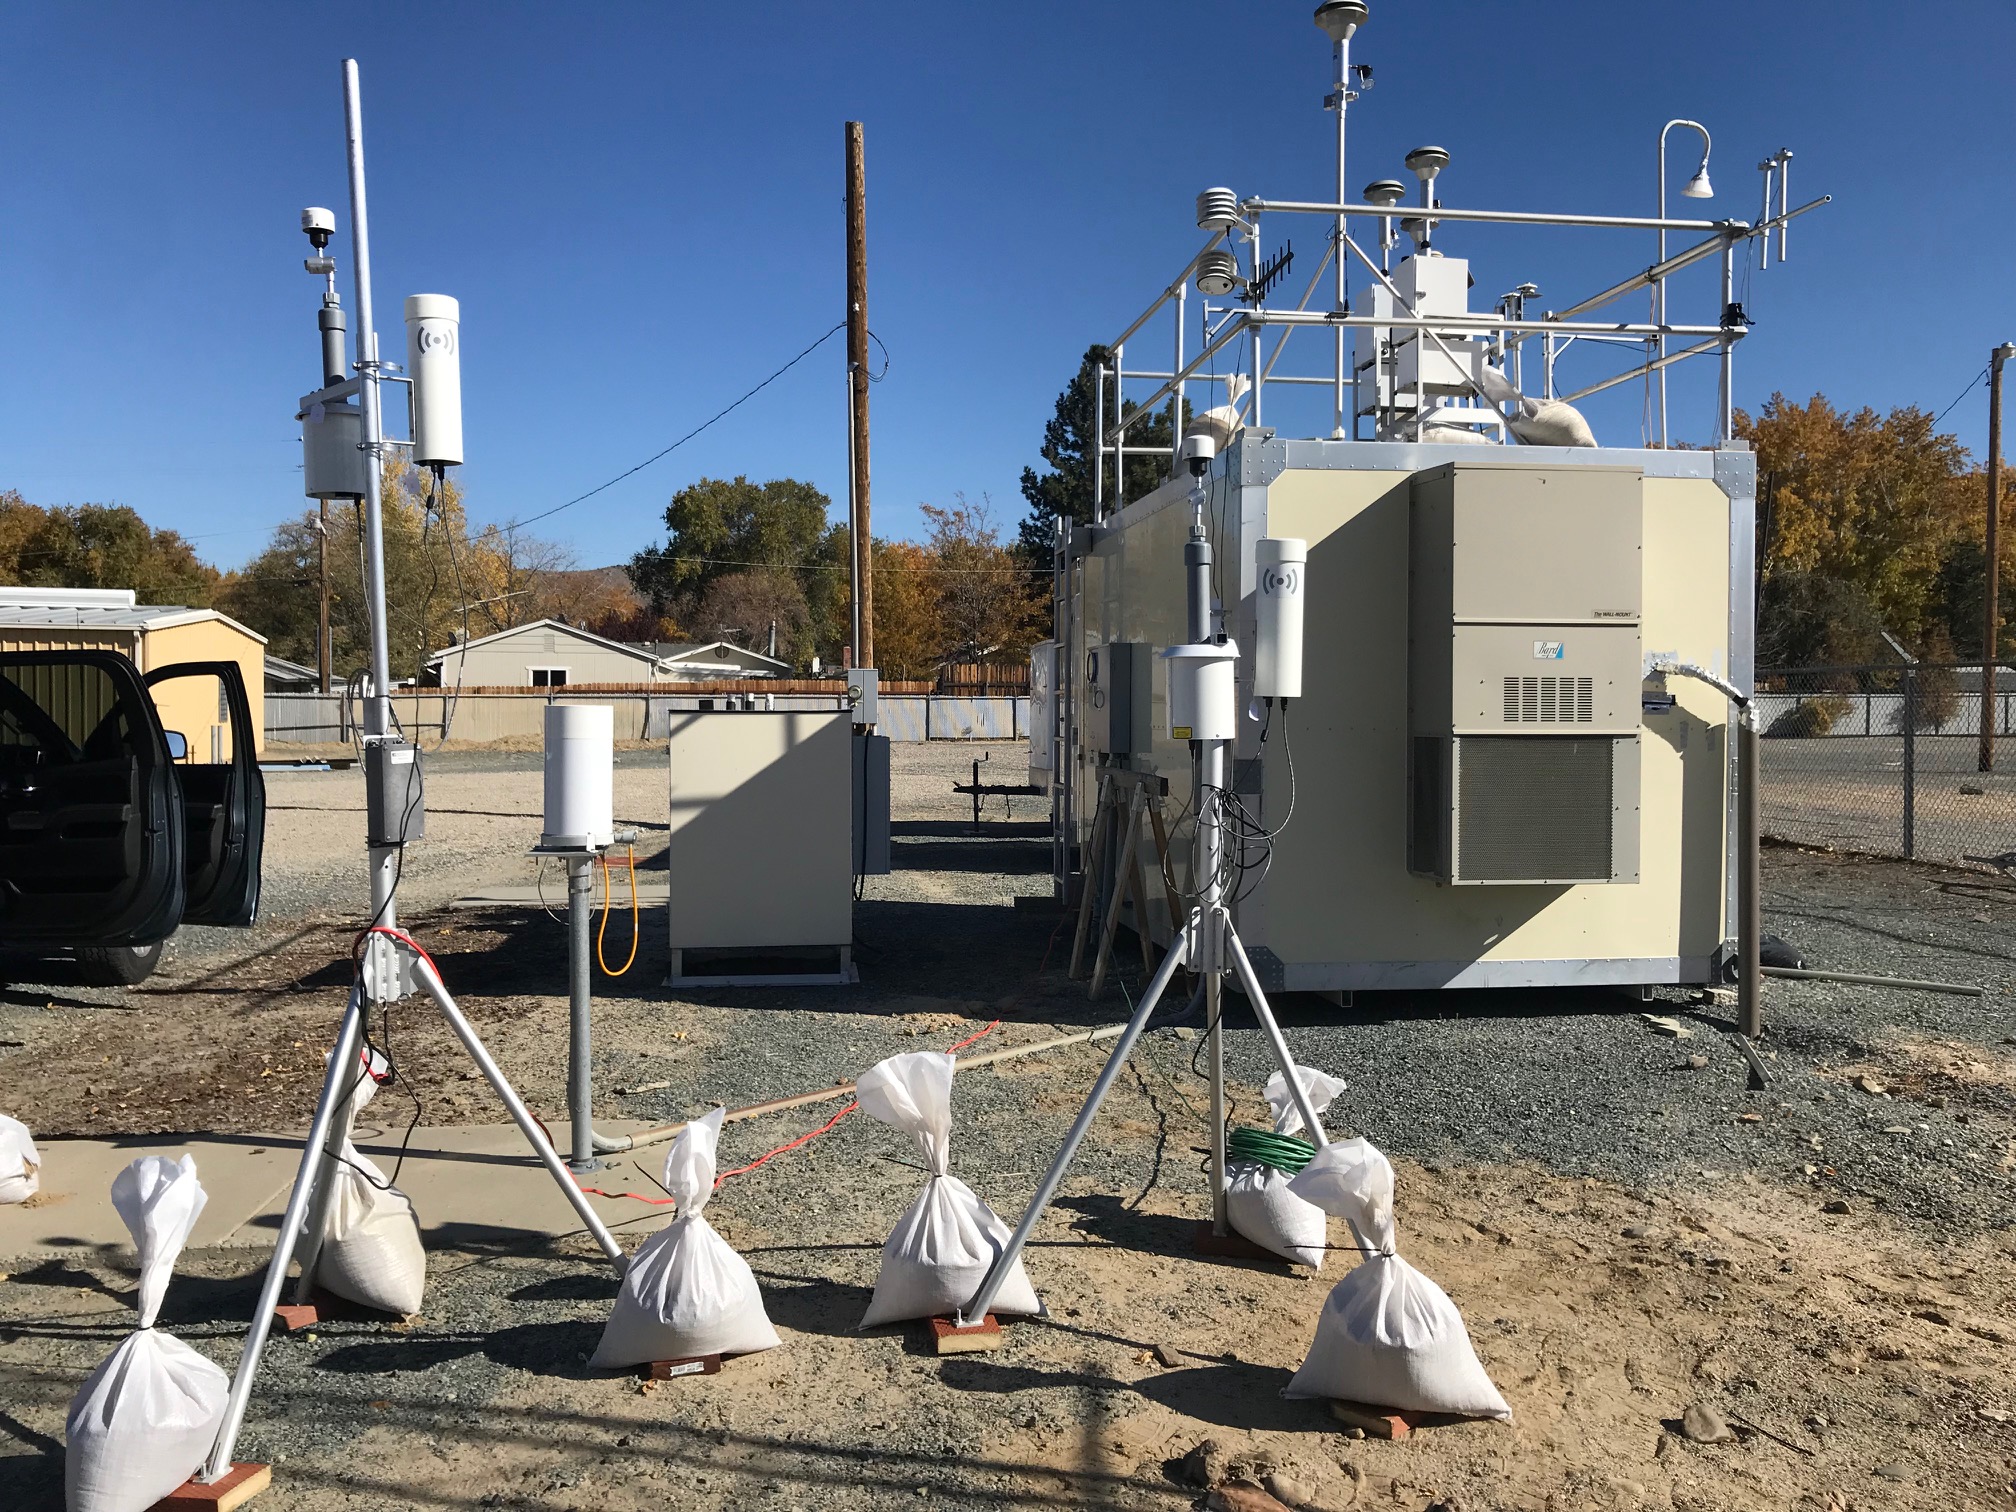 An image showing two portable air sensors and one permanent air quality monitoring station.